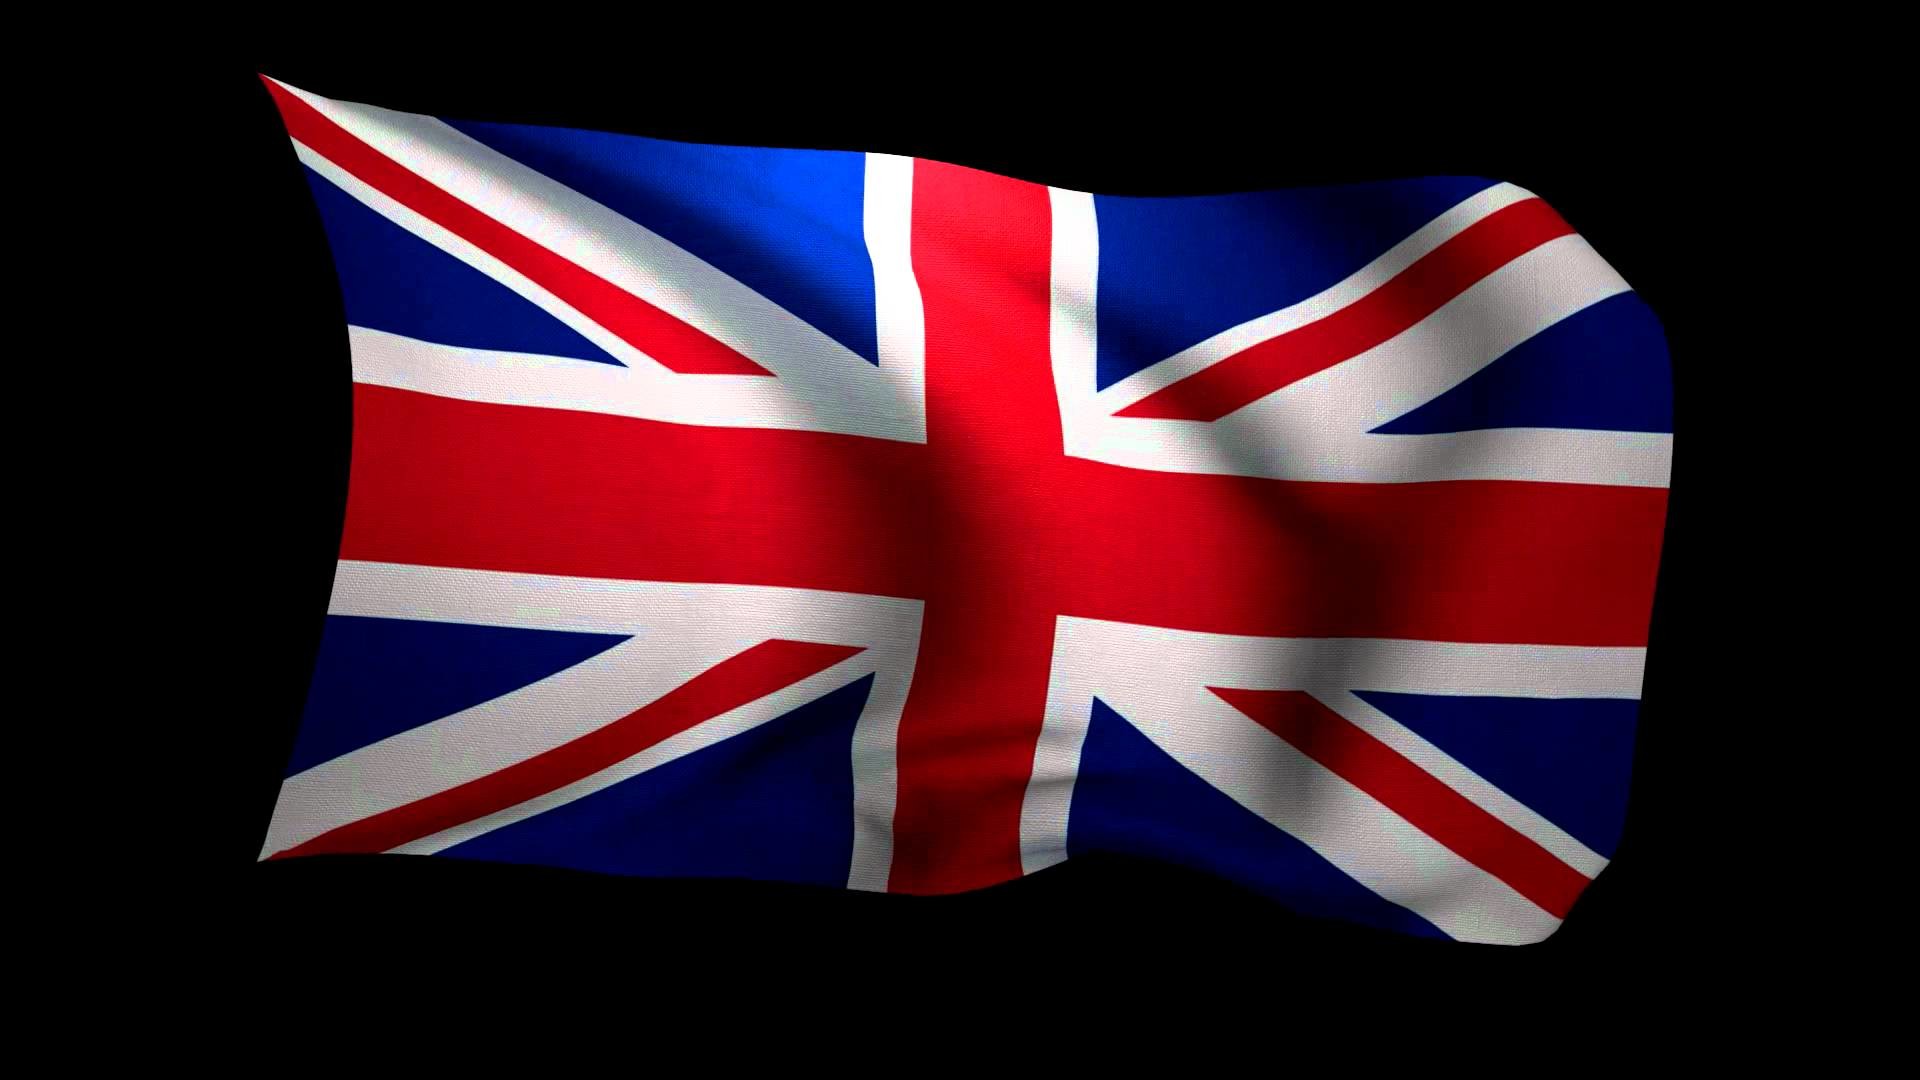 1920x1080 3D Rendering of the flag of the United Kingdom waving in the wind. - YouTube